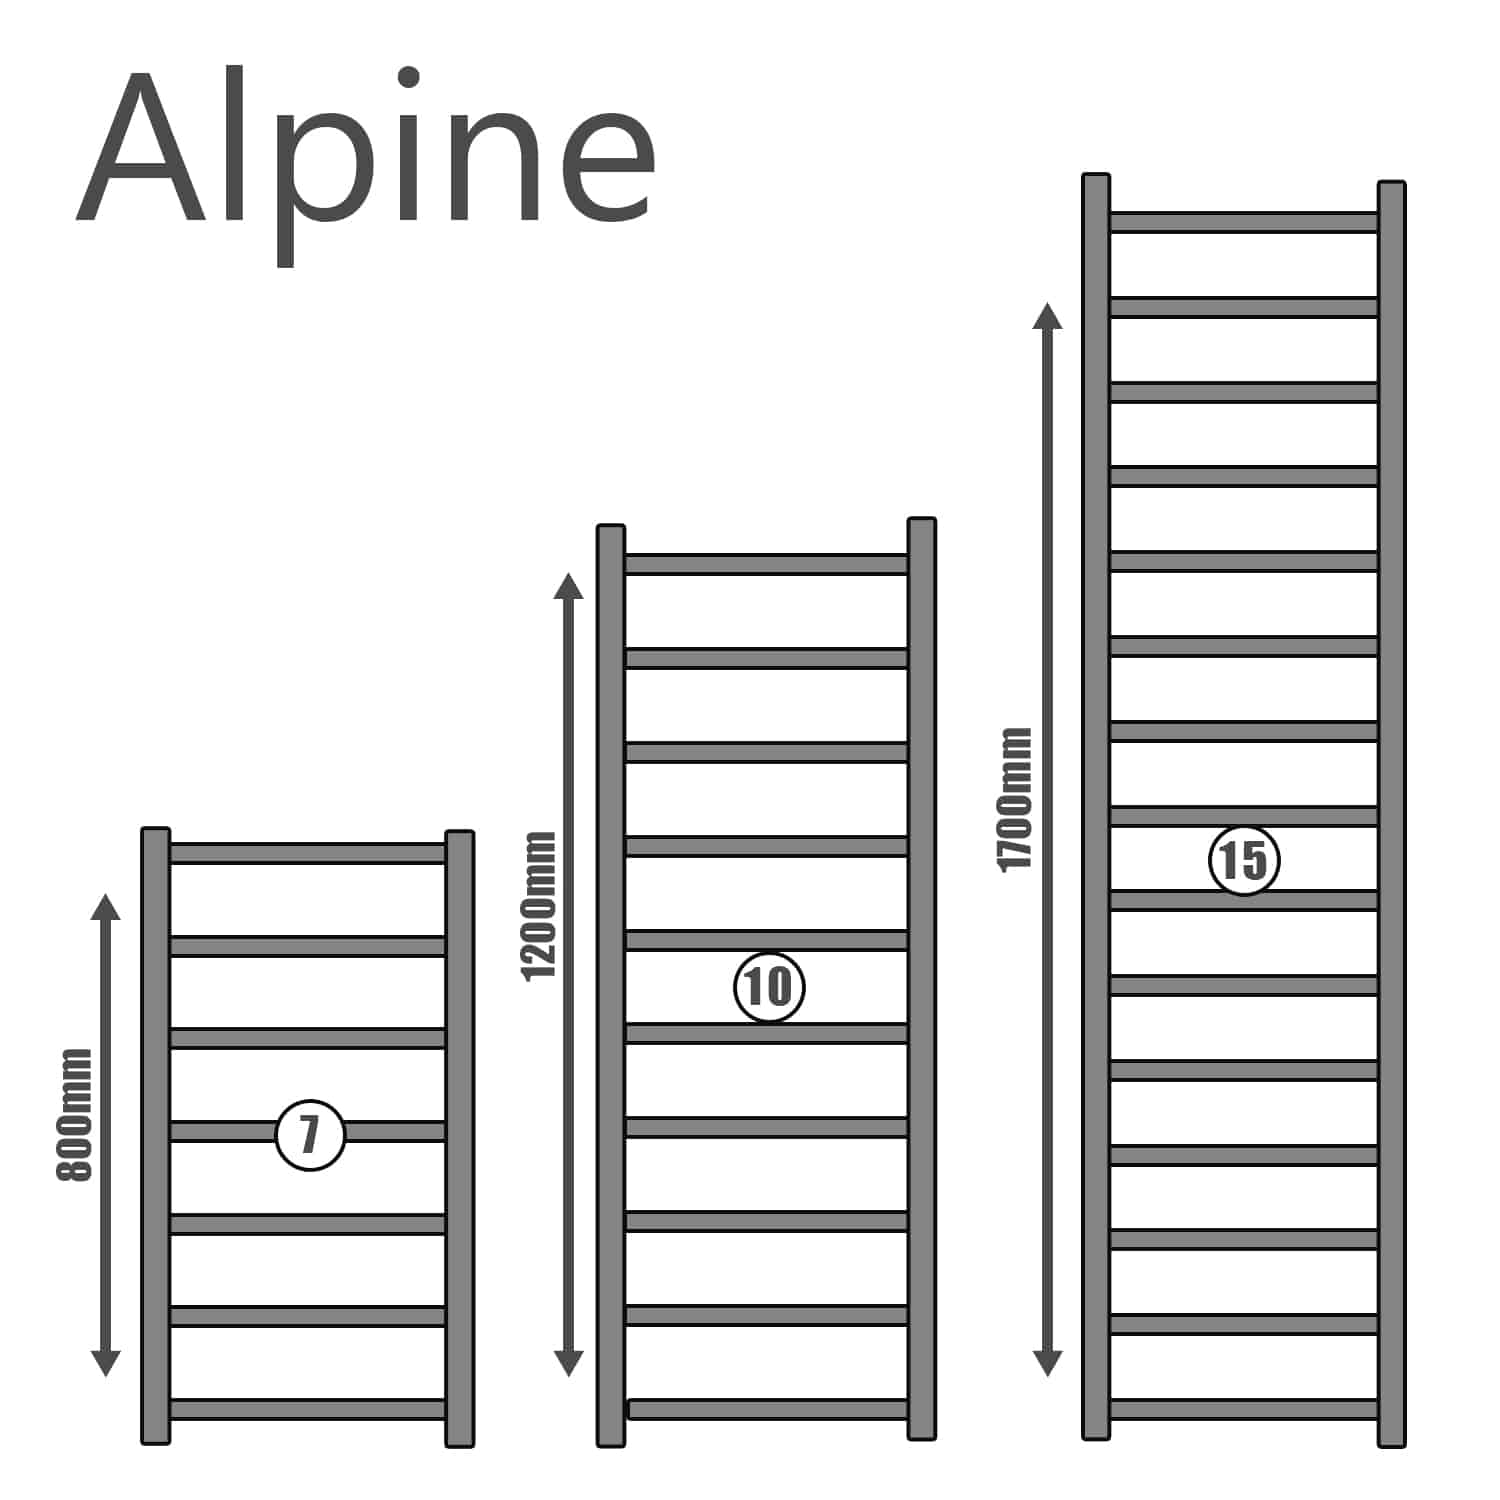 Alpine Anthracite | Dual Fuel Towel Rail with Thermostat, Timer + WiFi Control Best Quality & Price, Energy Saving / Economic To Run Buy Online From Adax SolAire UK Shop 10